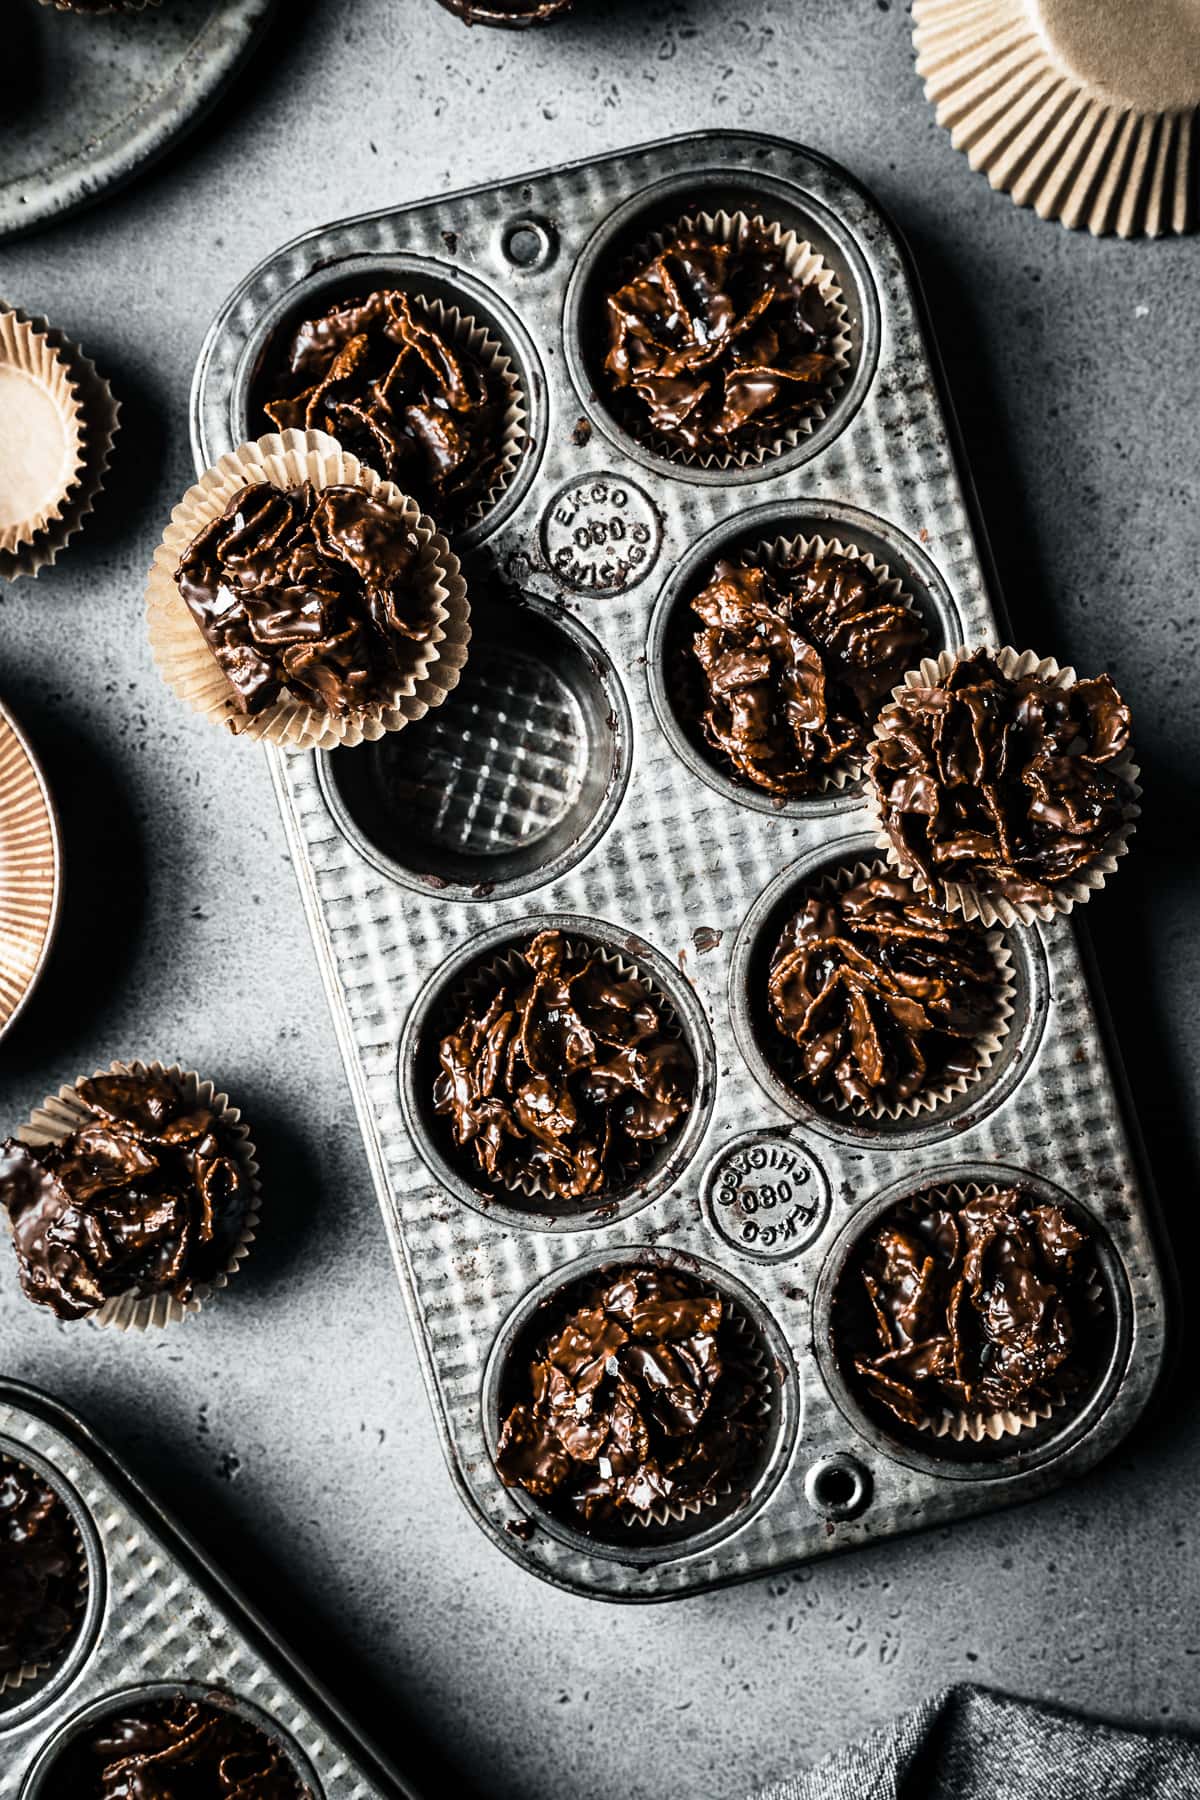 A vintage silver mini muffin tins hold chocolate covered cornflake cereal, called roses de sables. They rest on a grey stone surface and are surrounded by a brown bowl and brown paper muffin liners,